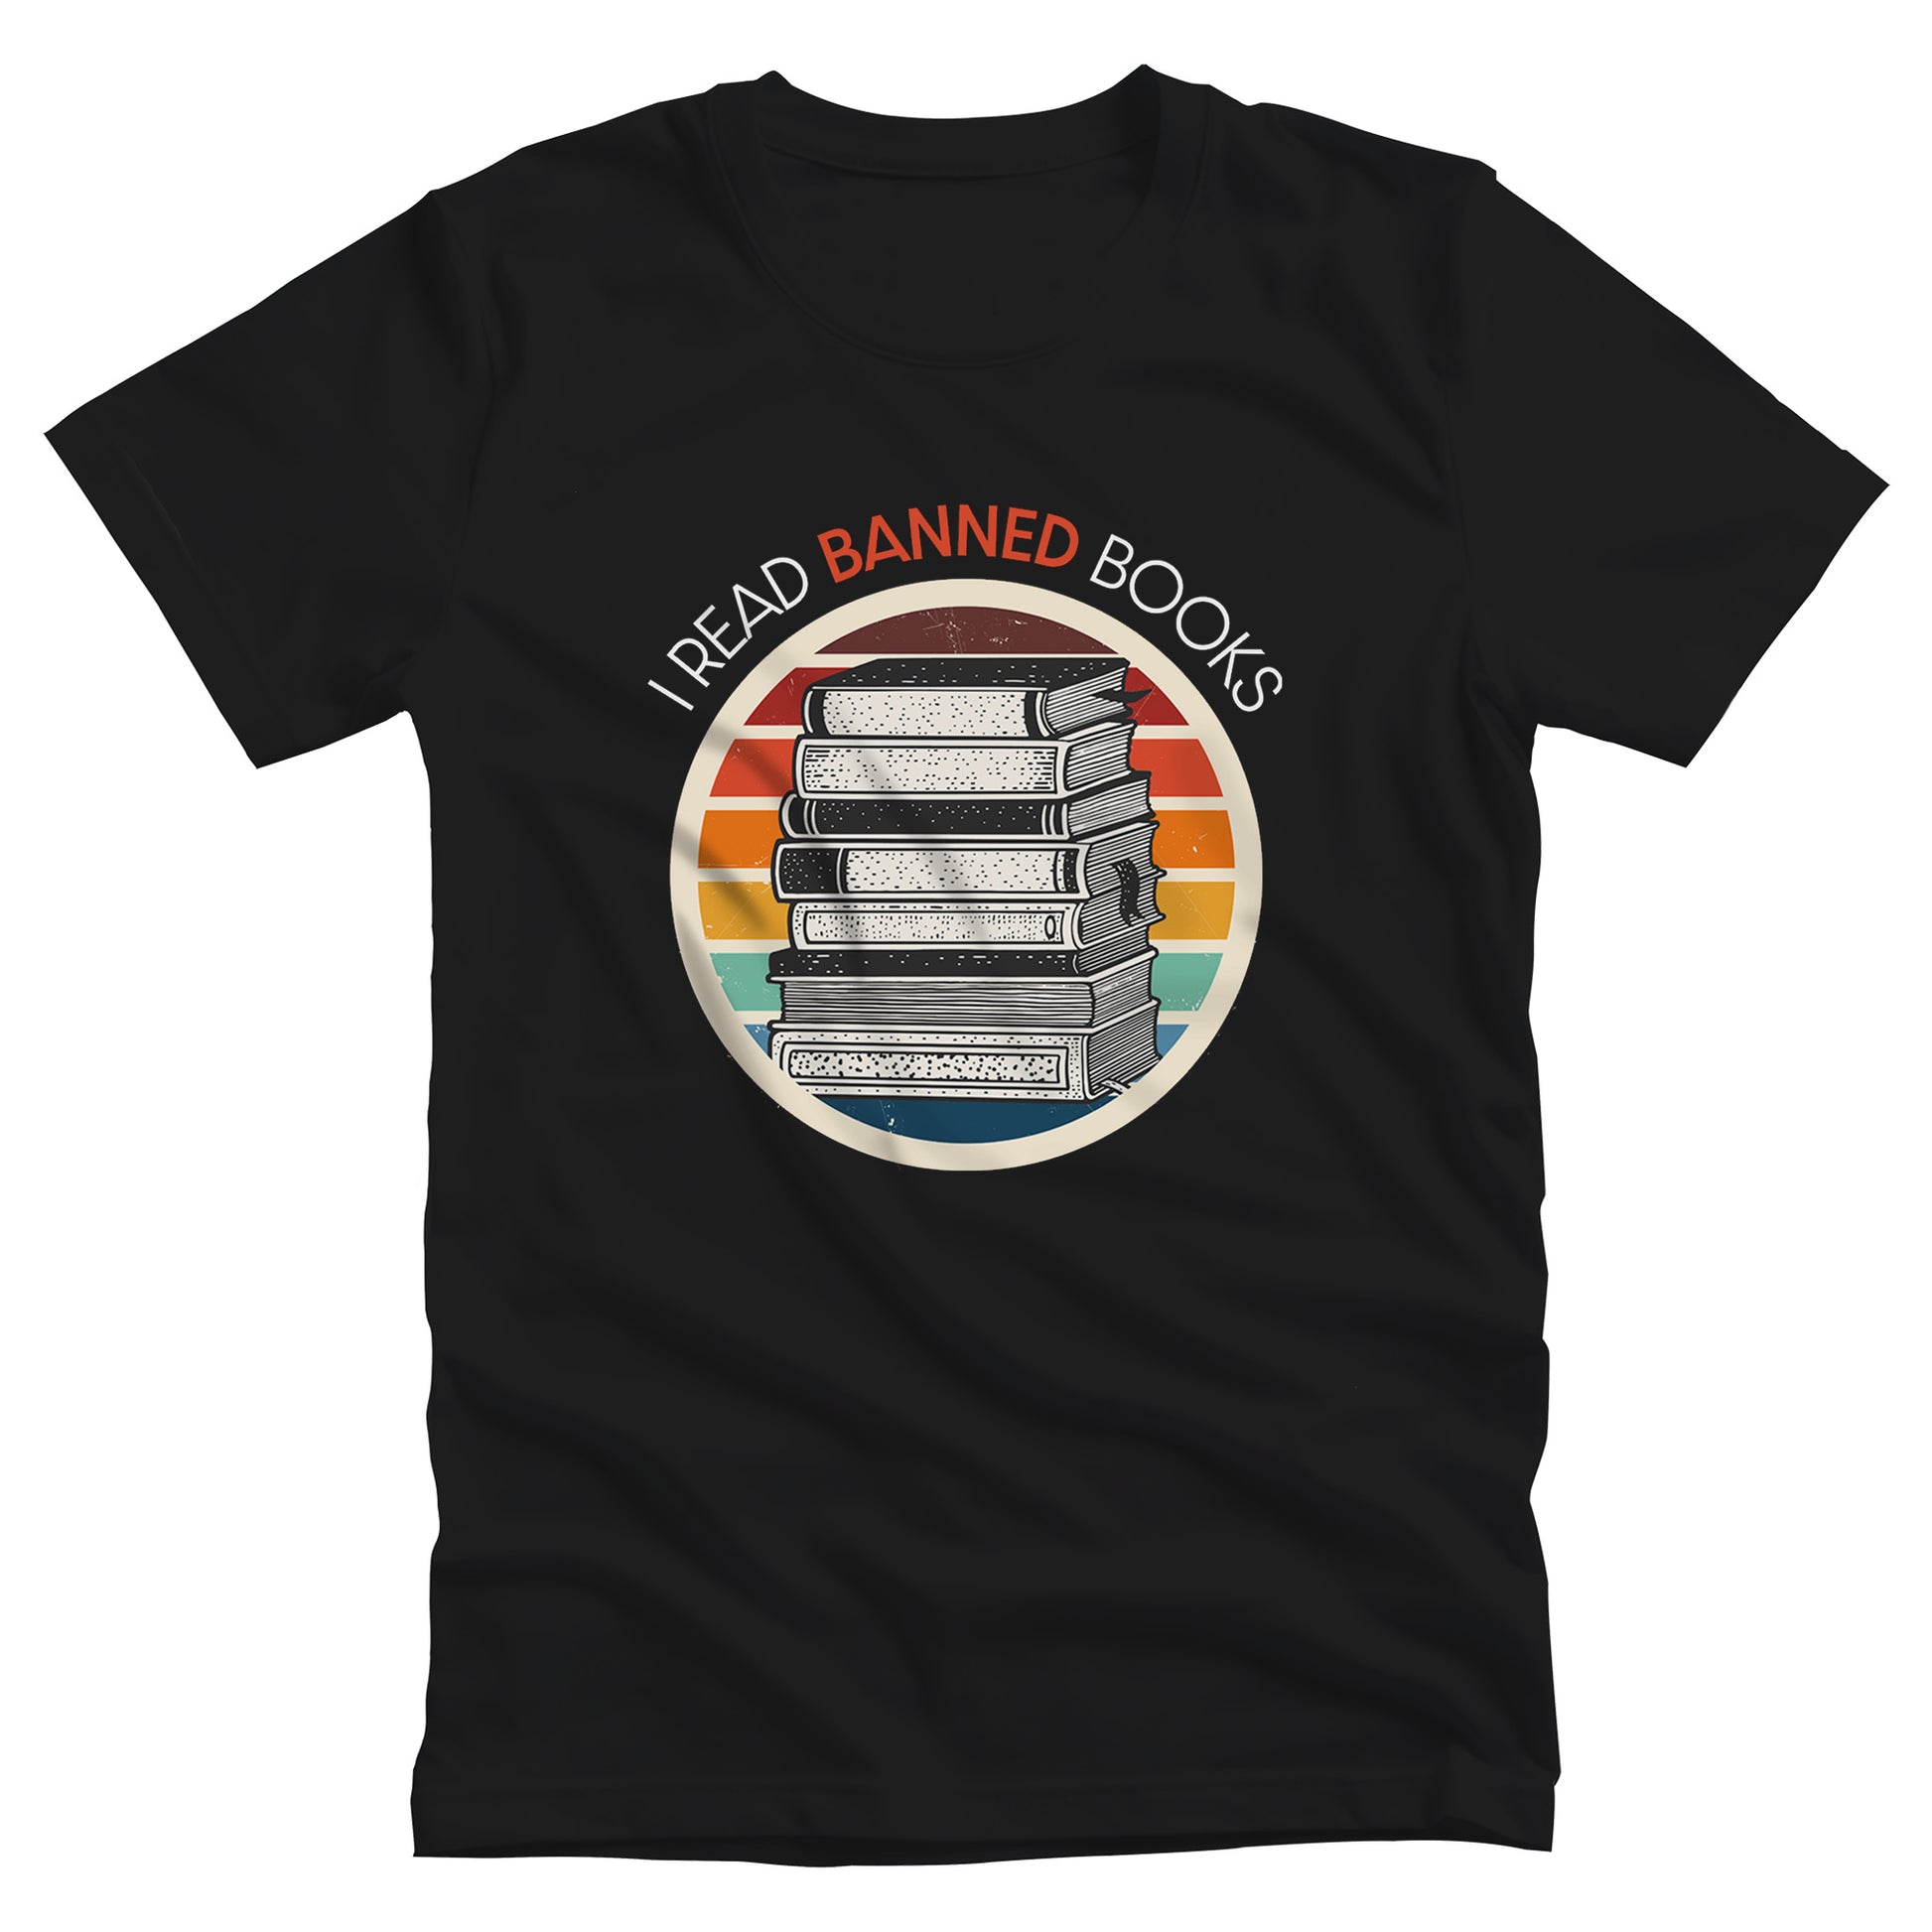 Black unisex t-shirt with a circular graphic of stacked old books with a vintage sunset made from horizontal lines behind it. “I READ BANNED BOOKS” is arched over the graphic with the word. “BANNED” an orange color.